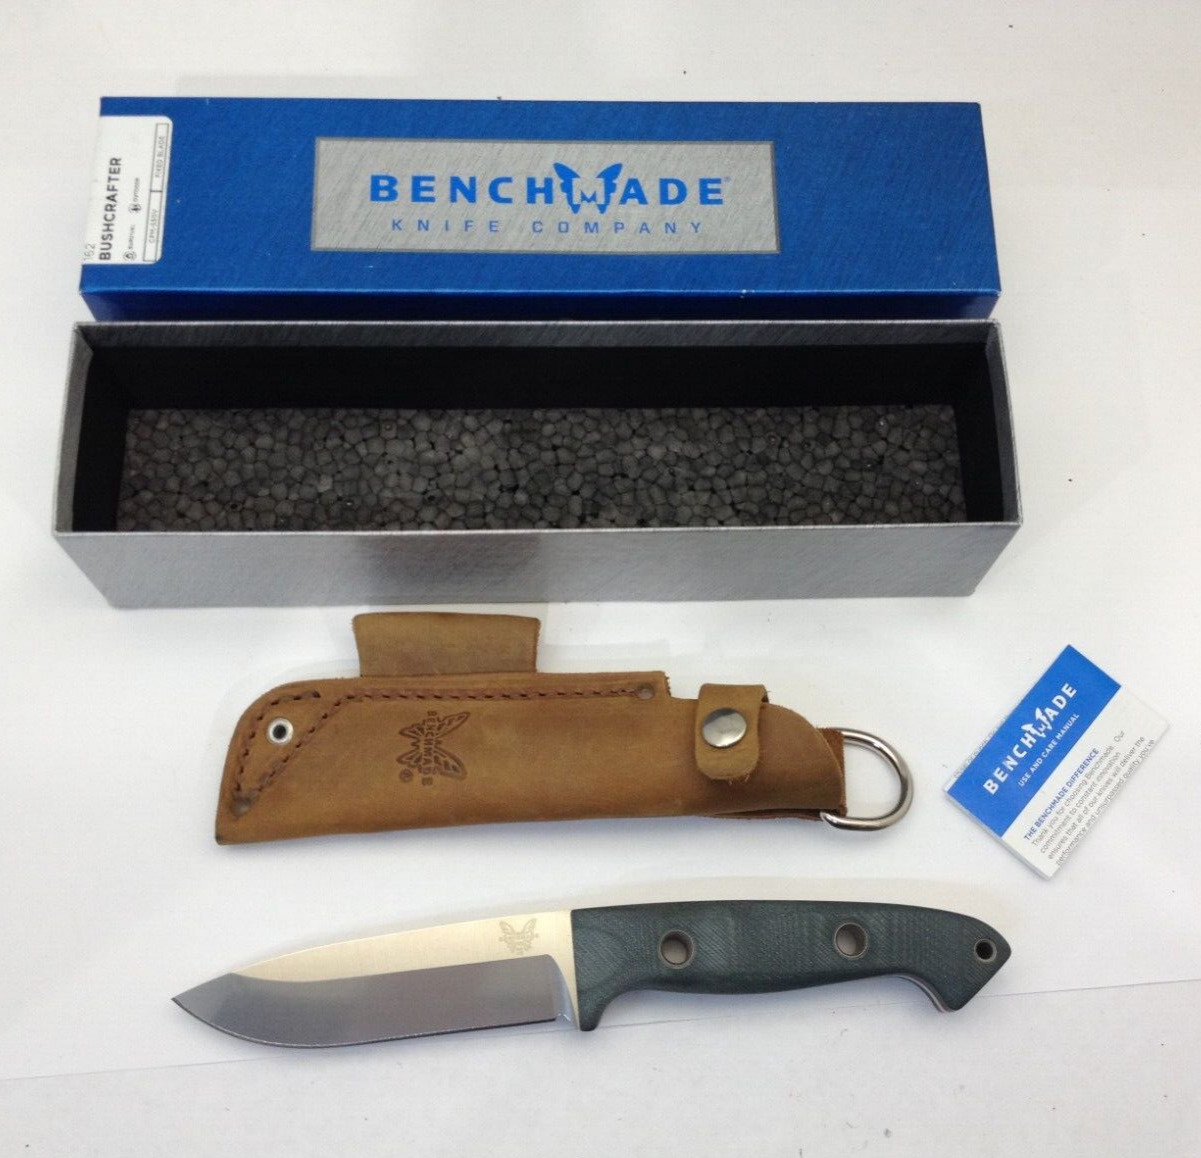 BENCHMADE 162 BUSHCRAFTER S30V FIX BLADE NEW IN THE BOX